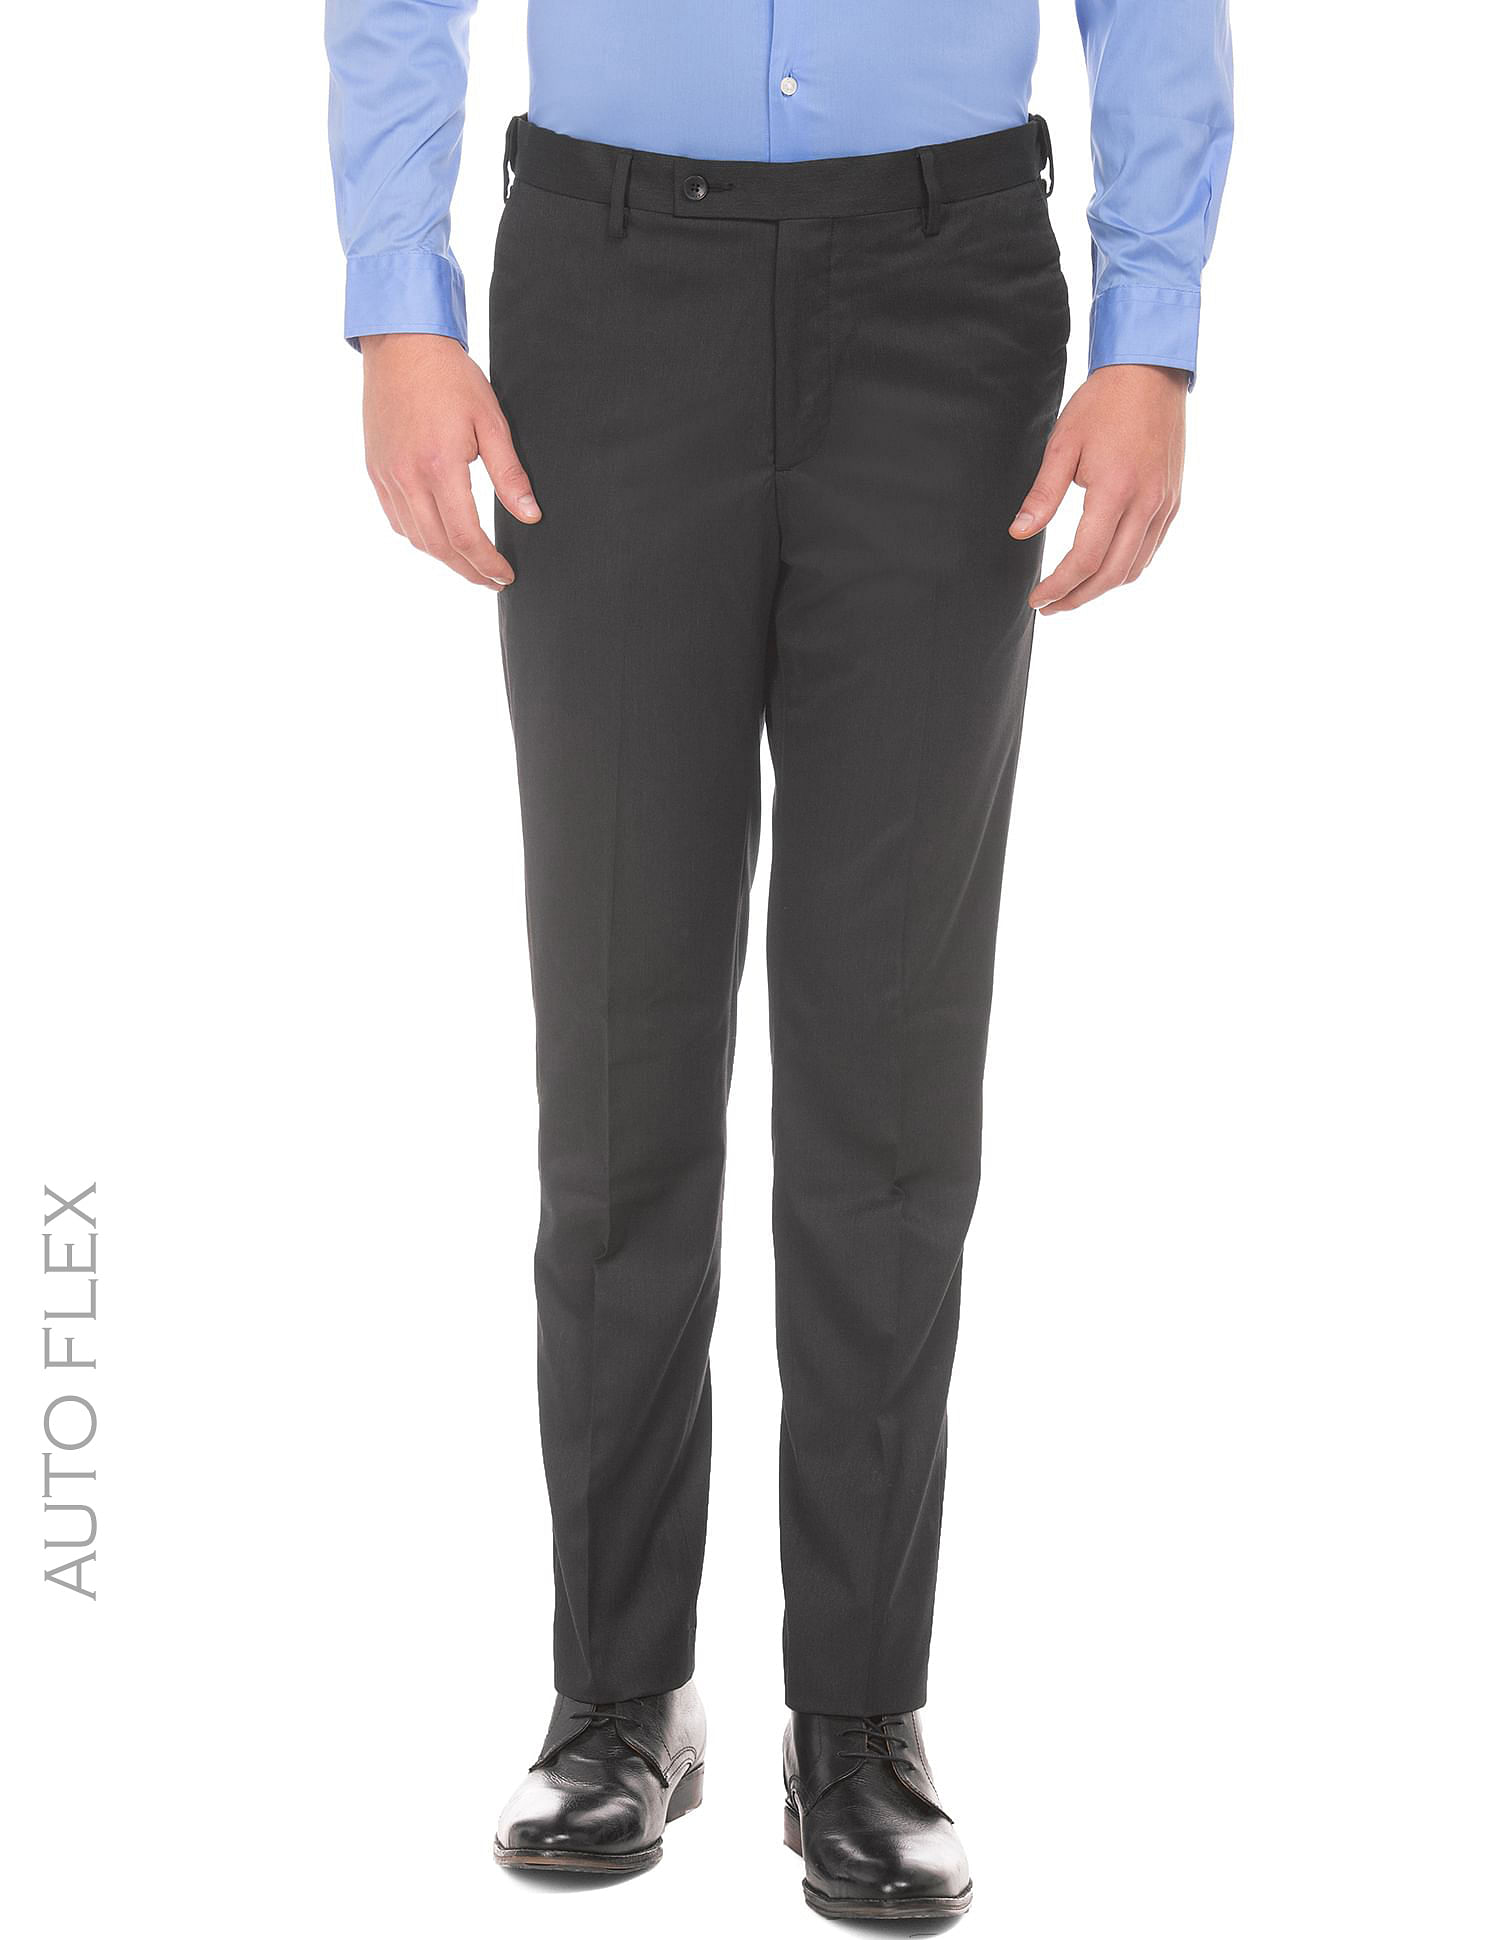 Arrow Tapered Fit Autoflex Waist Patterned Mens Formal Trouser Navy Blue  12CWR6291FR in Chennai at best price by Attitude  Justdial